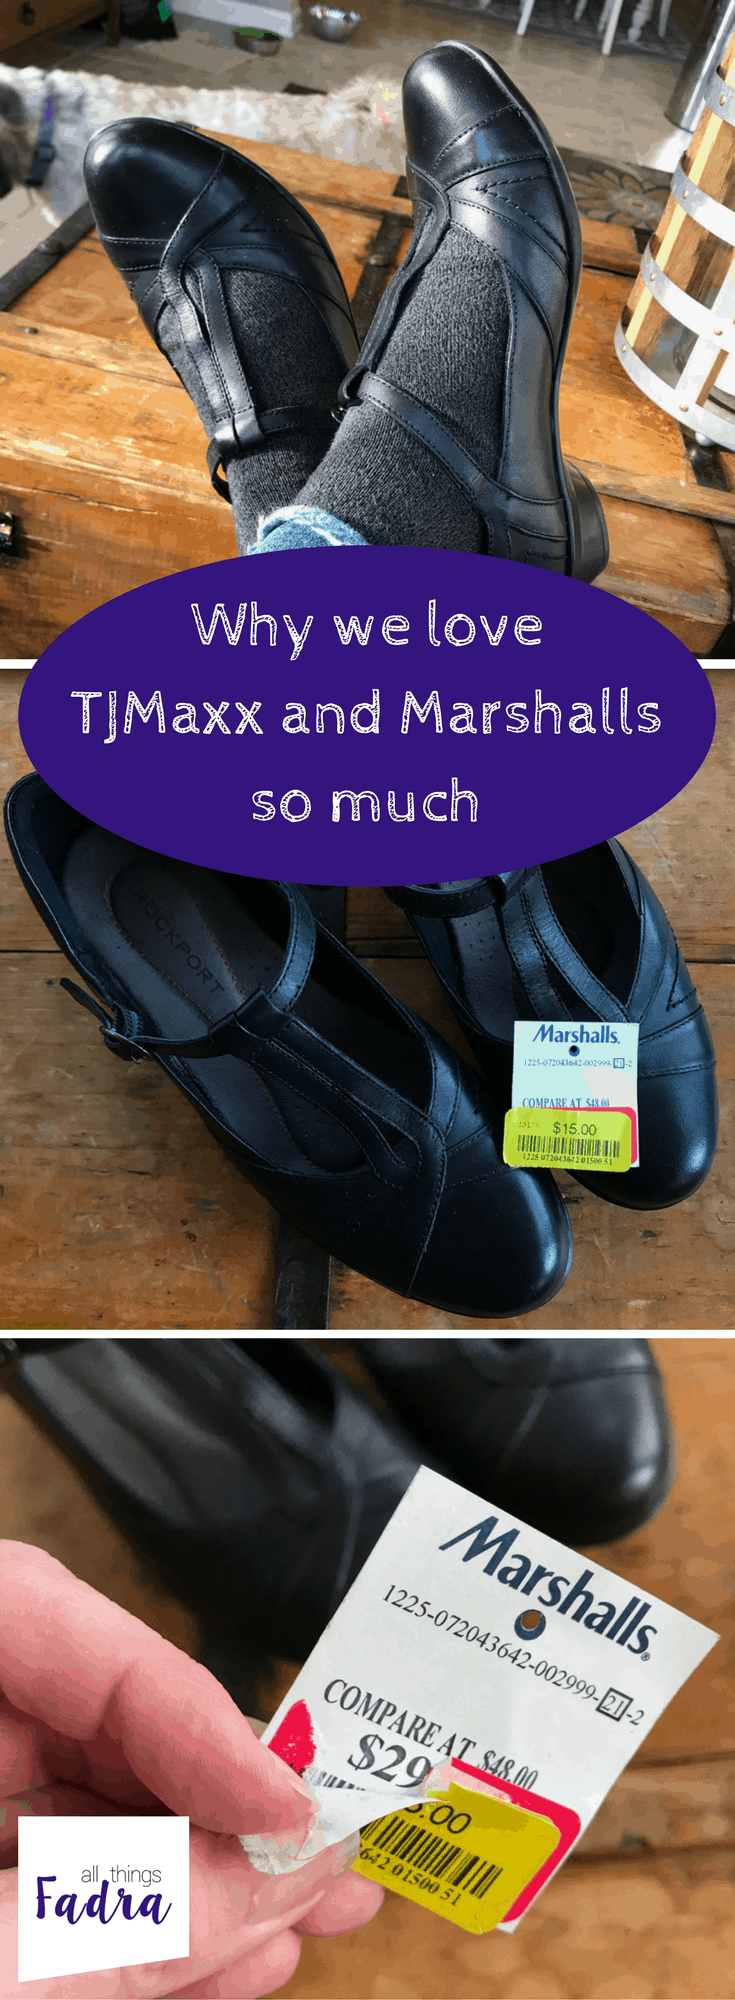 Why we love TJMaxx and Marshalls so much